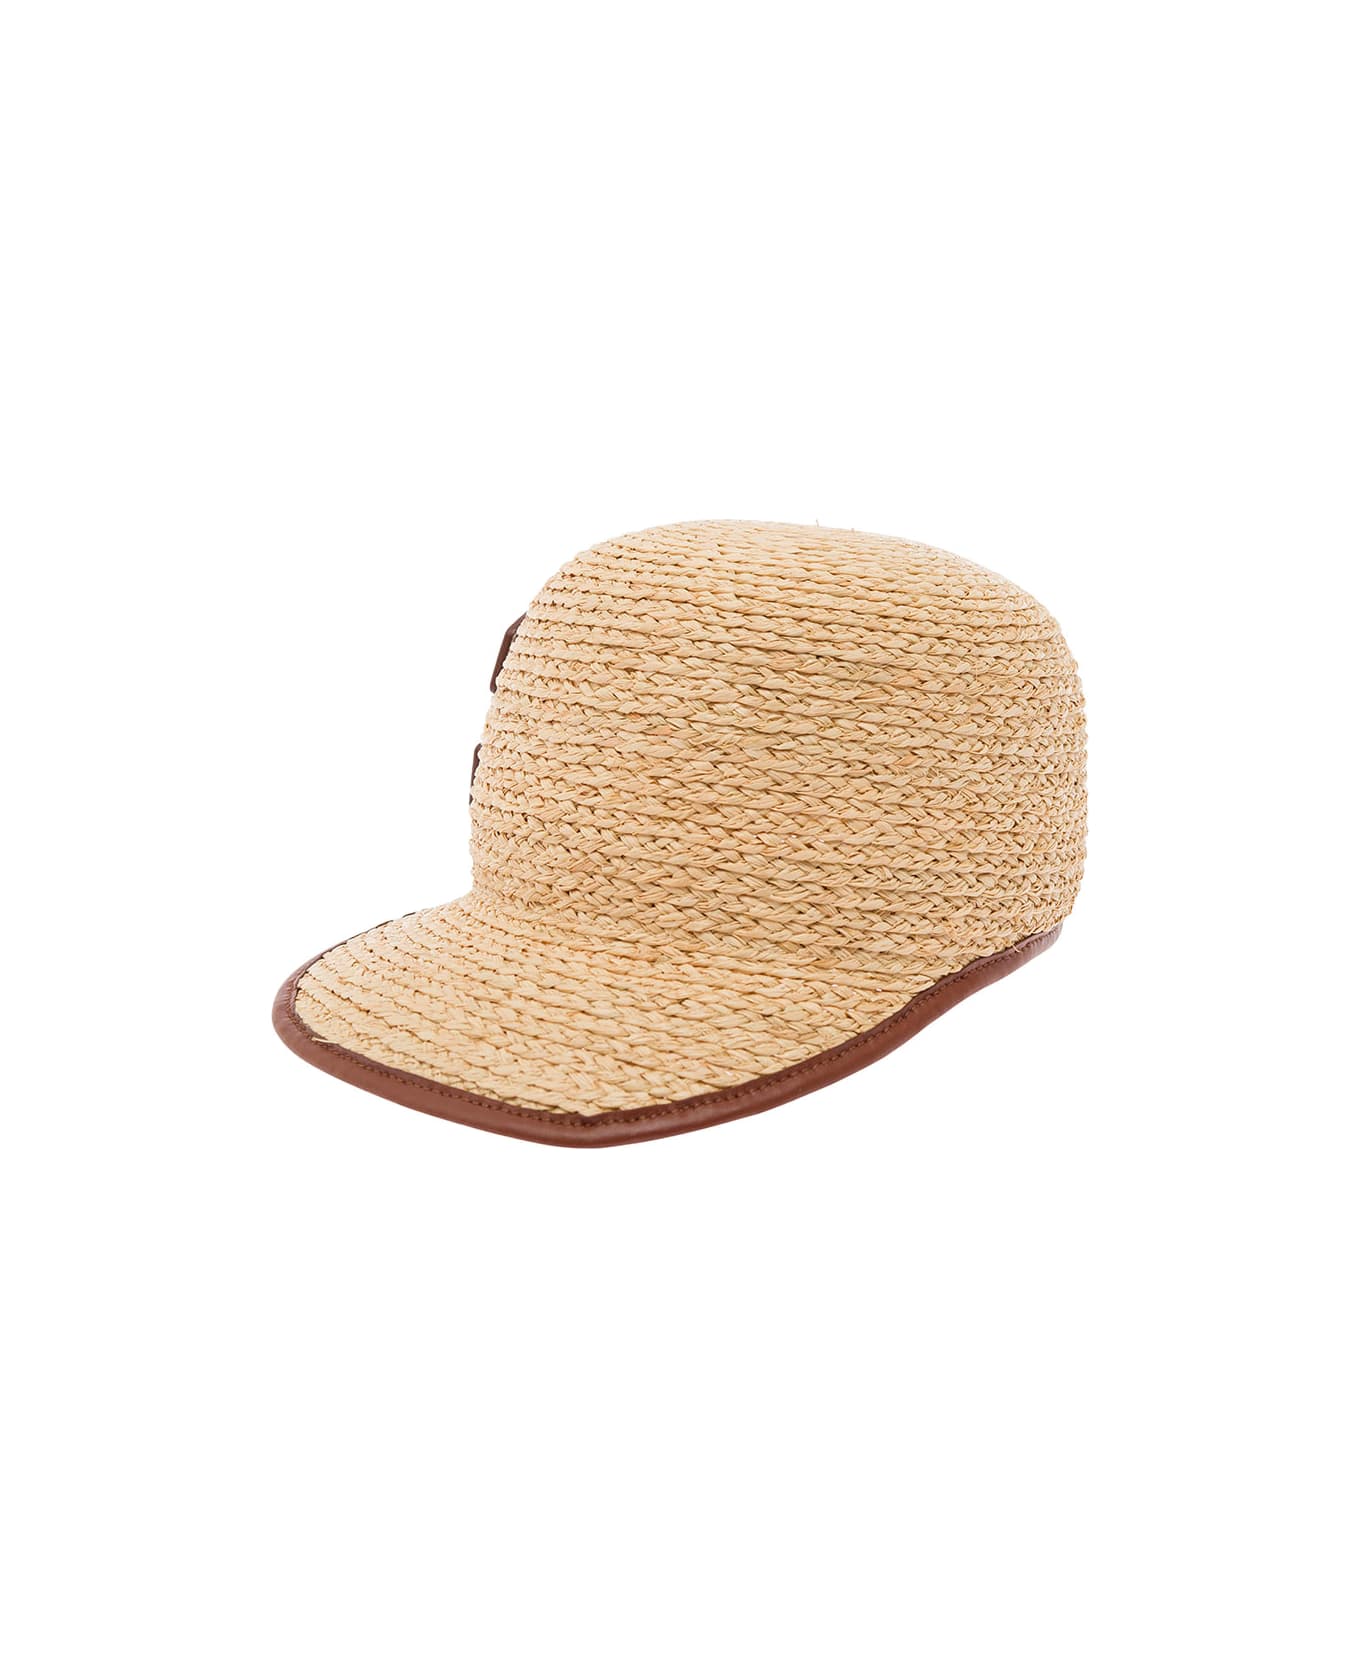 Casadei Beige Baseball Cap With Logo Detail In Leather And Rafia Woman - Beige 帽子